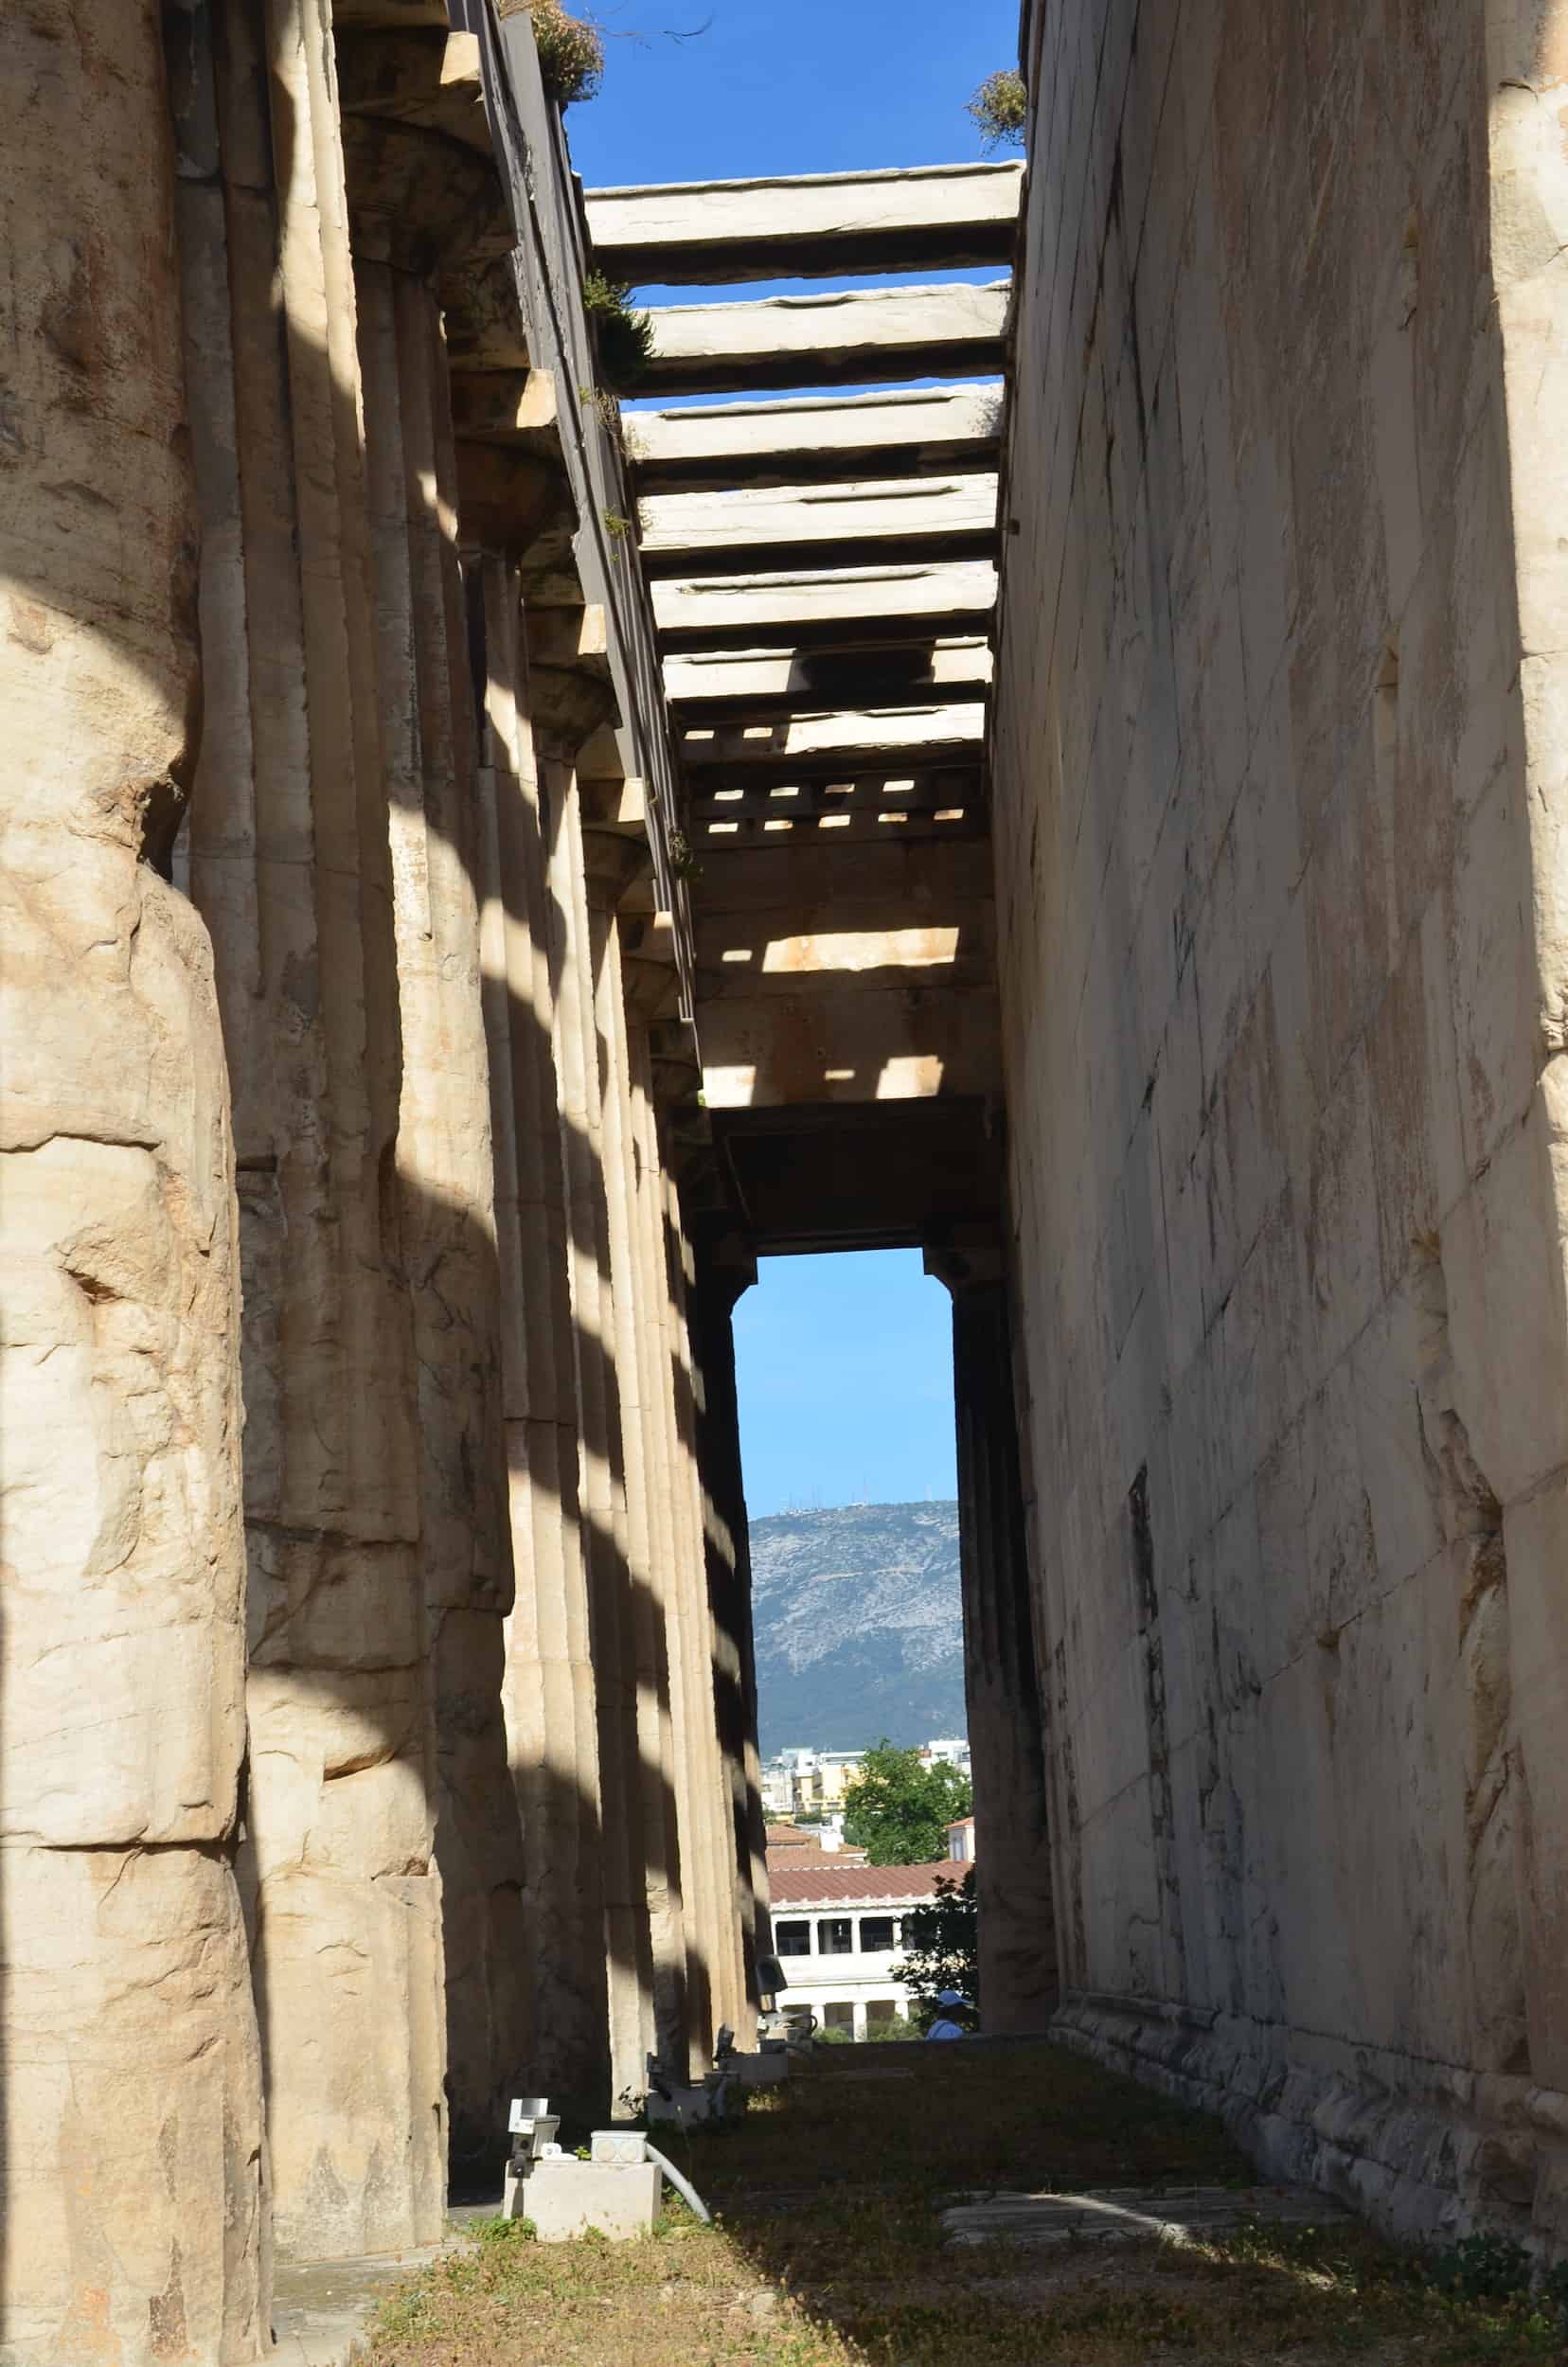 North peristyle of the Temple of Hephaestus